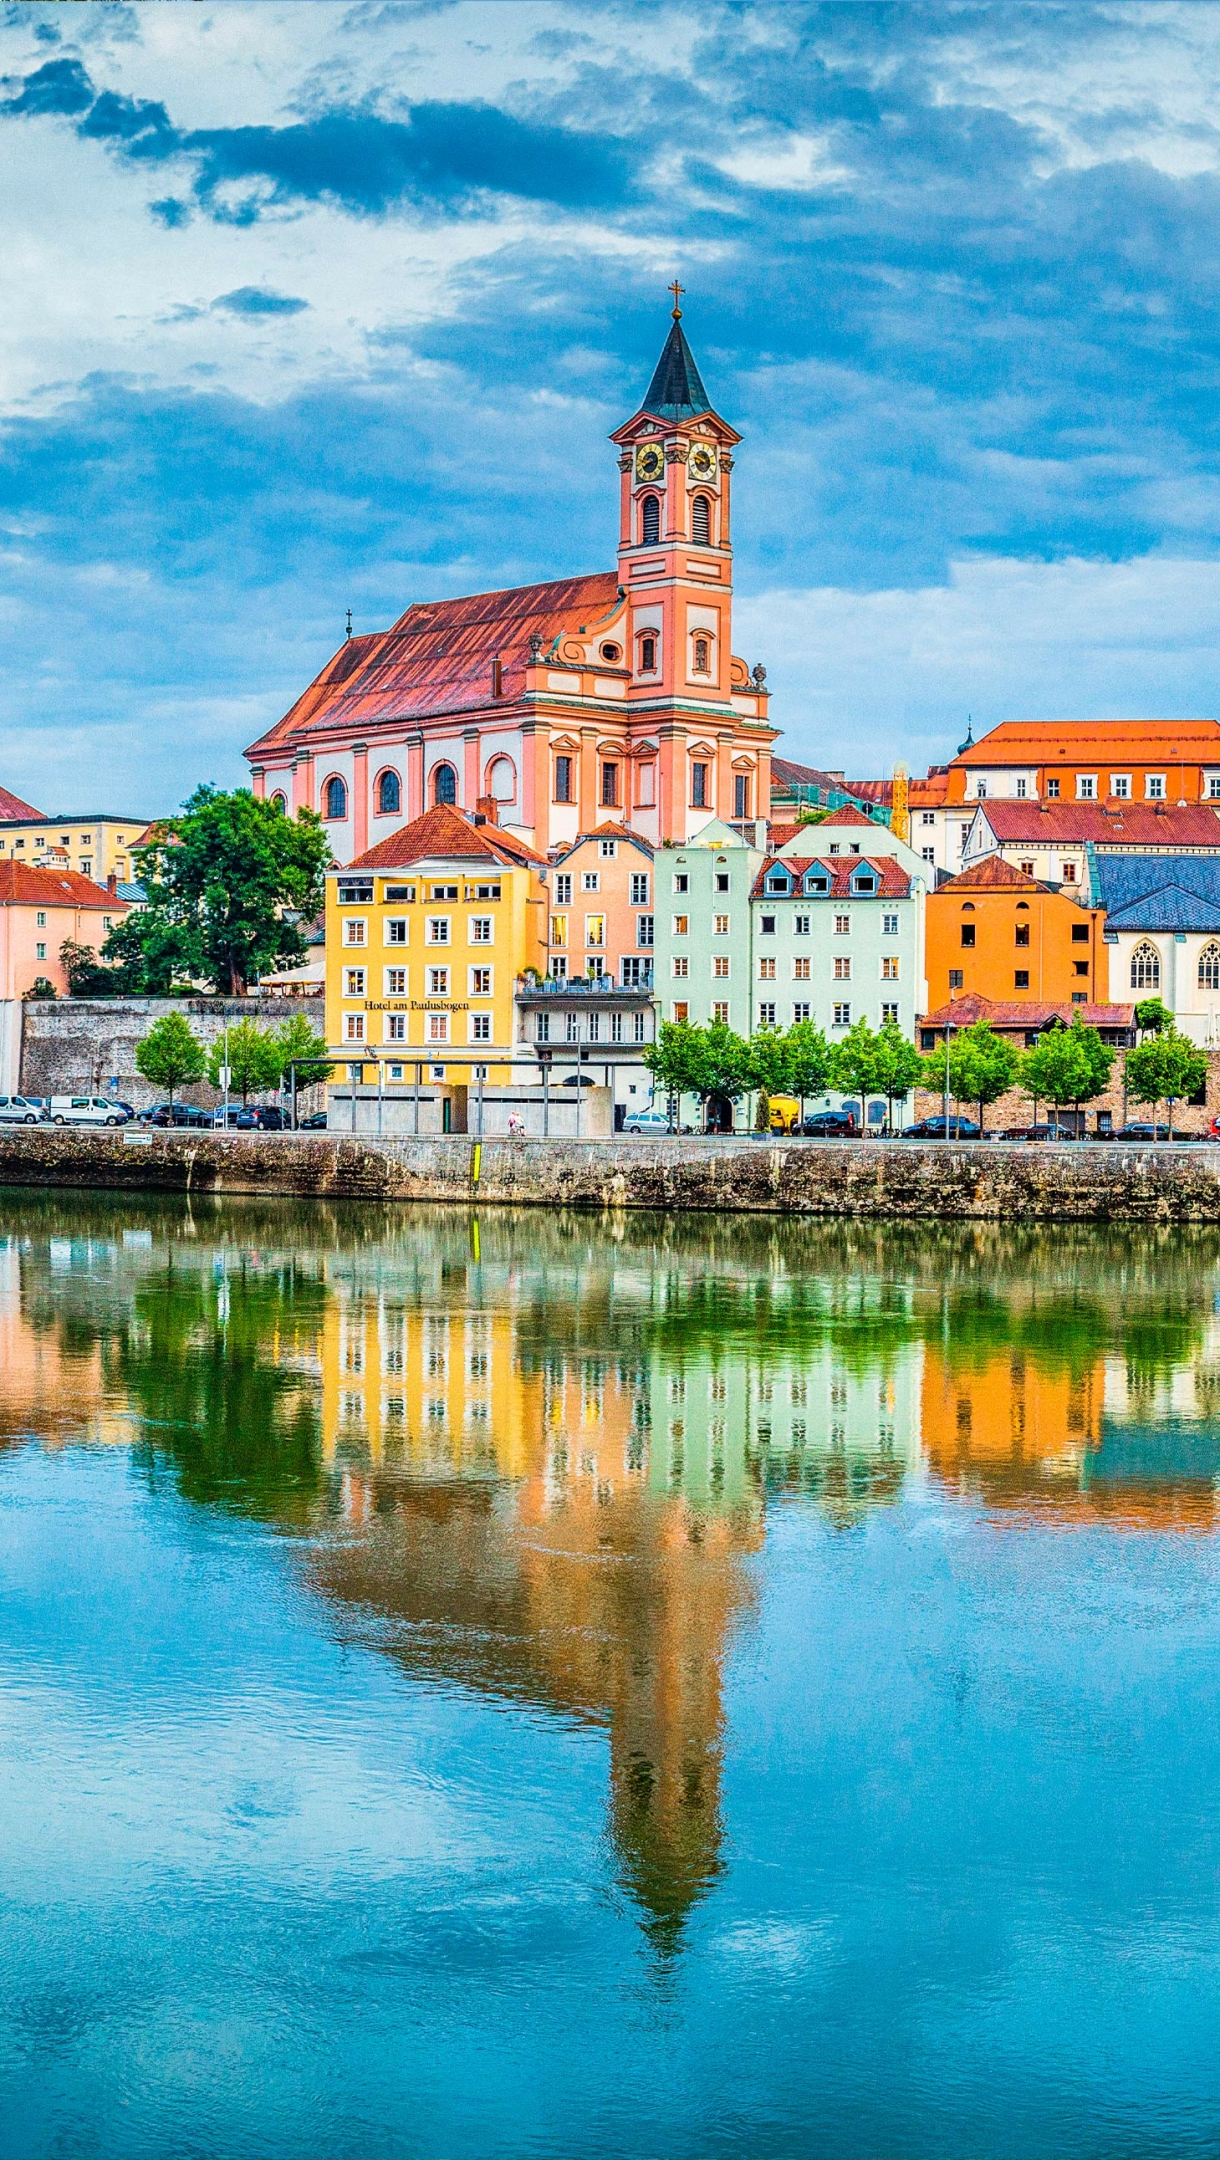 The city of Passau reflecting in the Danube River, Bavaria, Germany by Scott Wilson